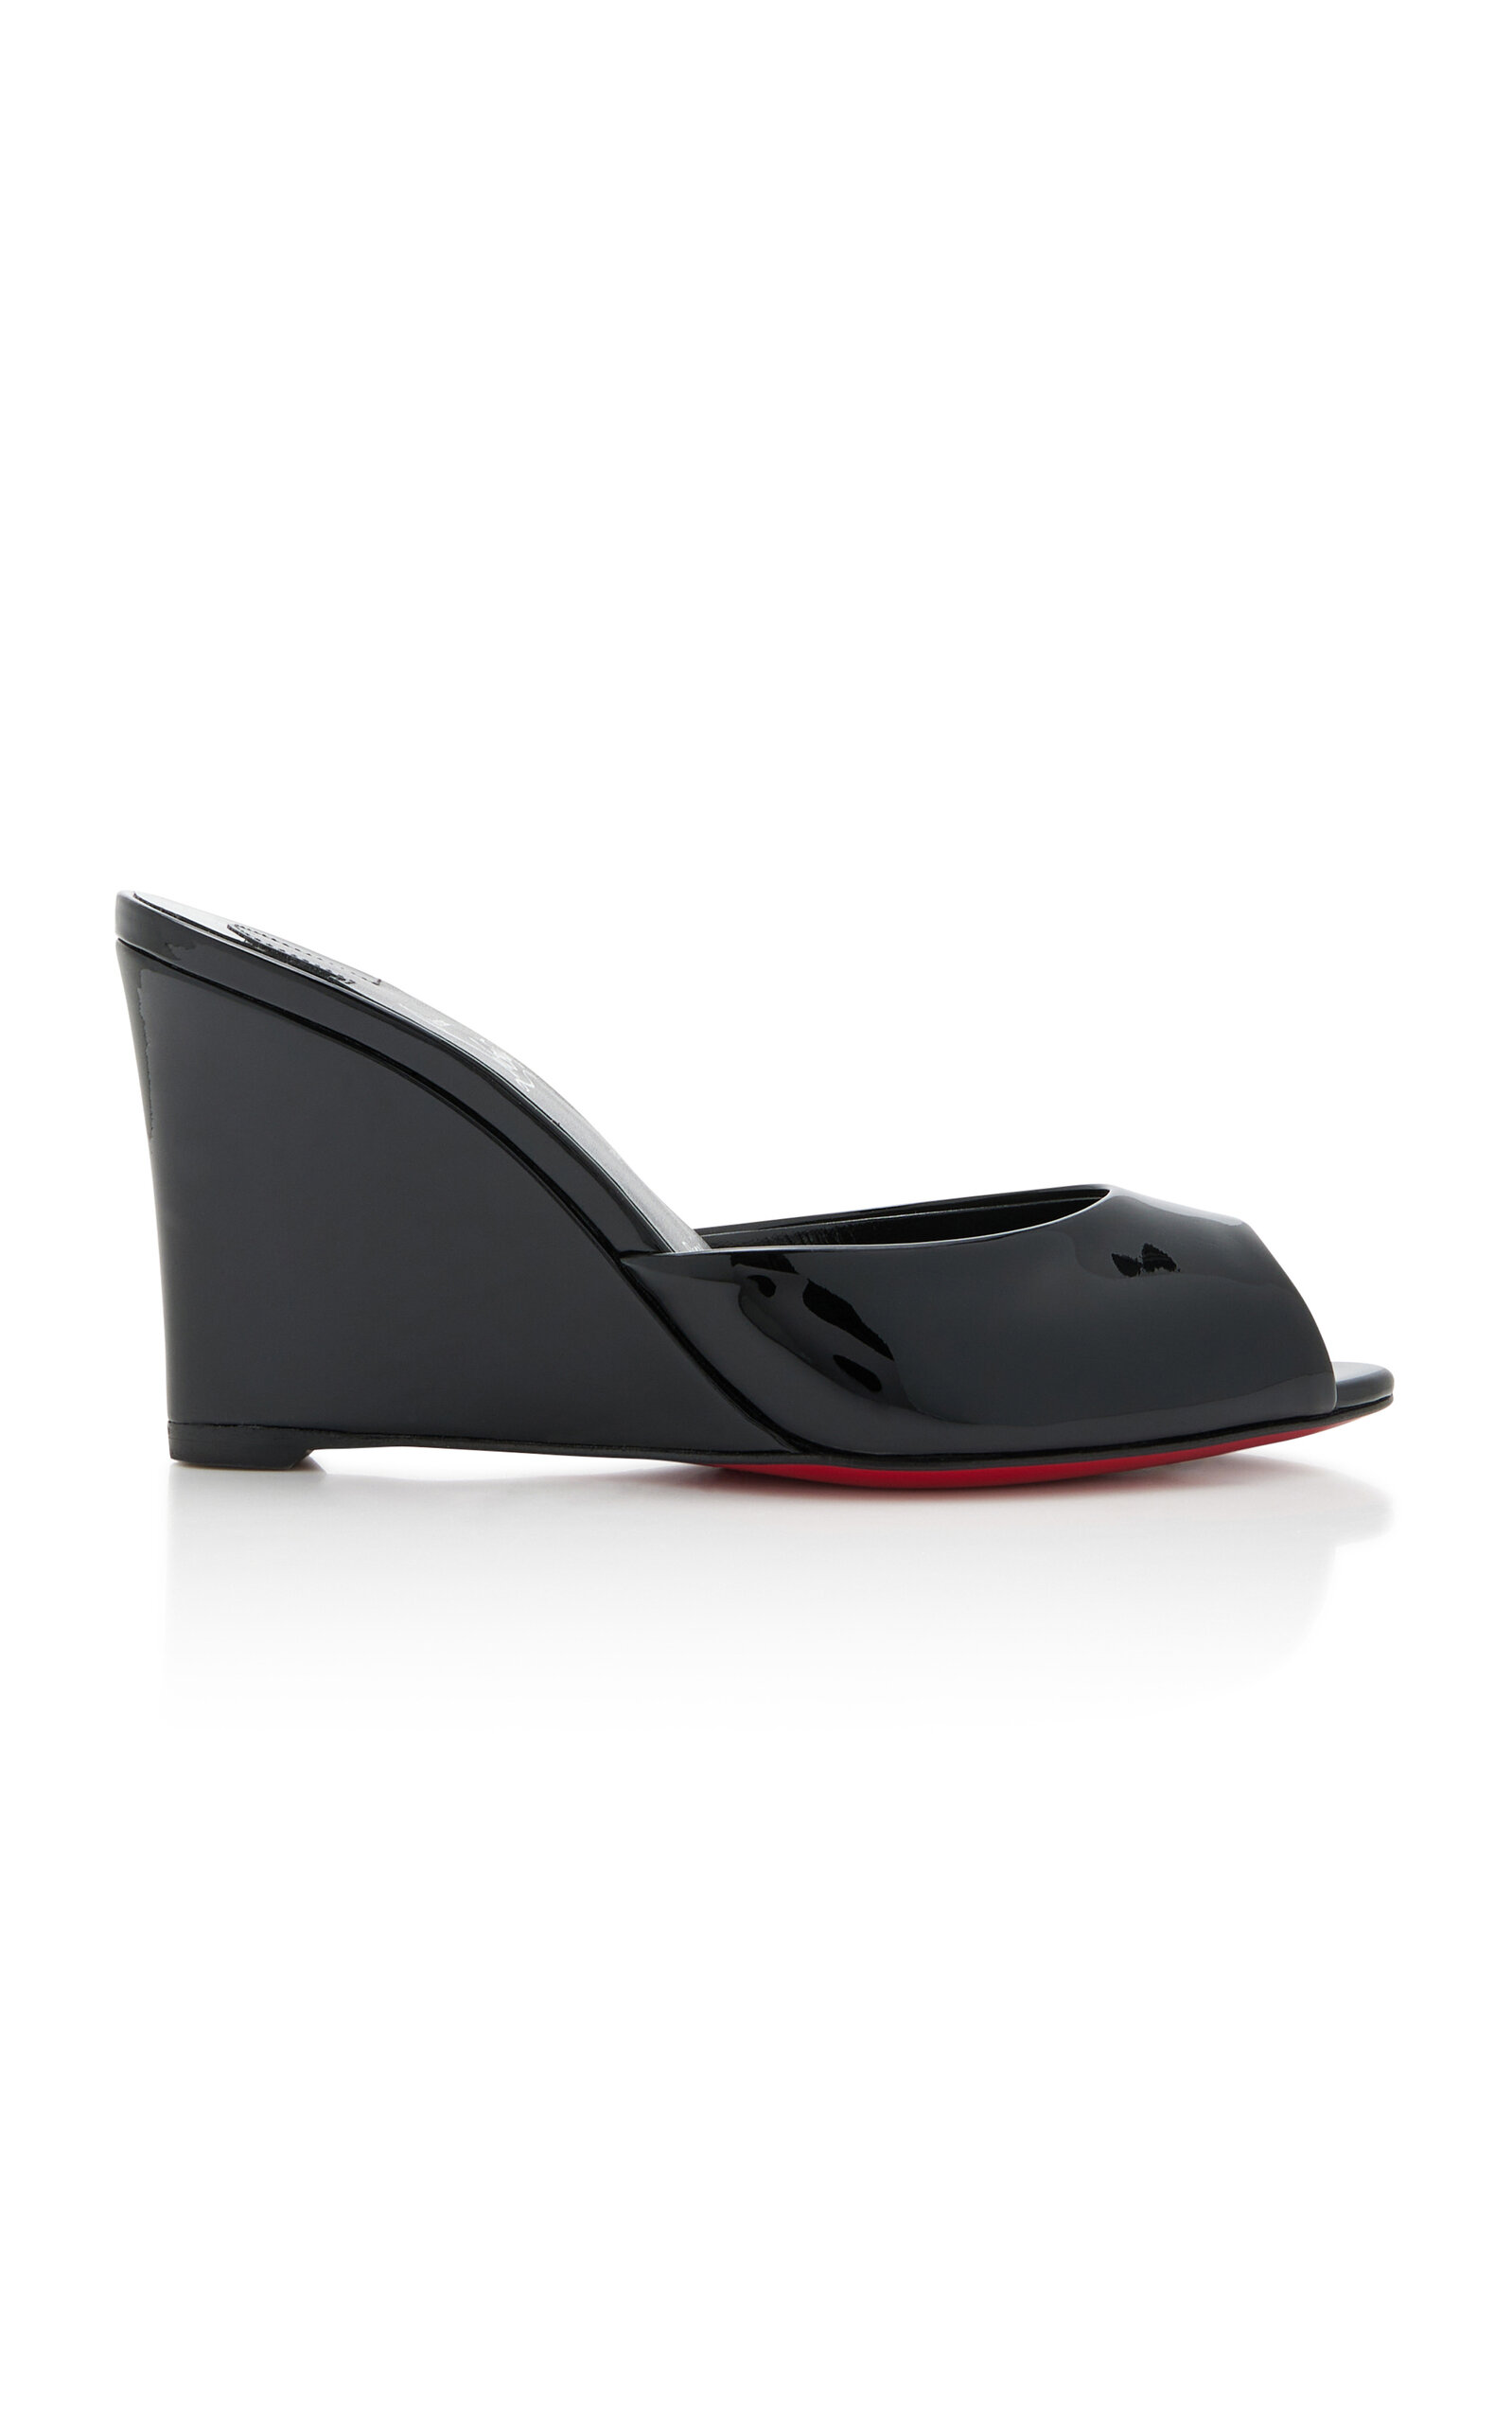 Christian Louboutin Women's Me Dolly 85mm Patent Leather Wedge Pumps